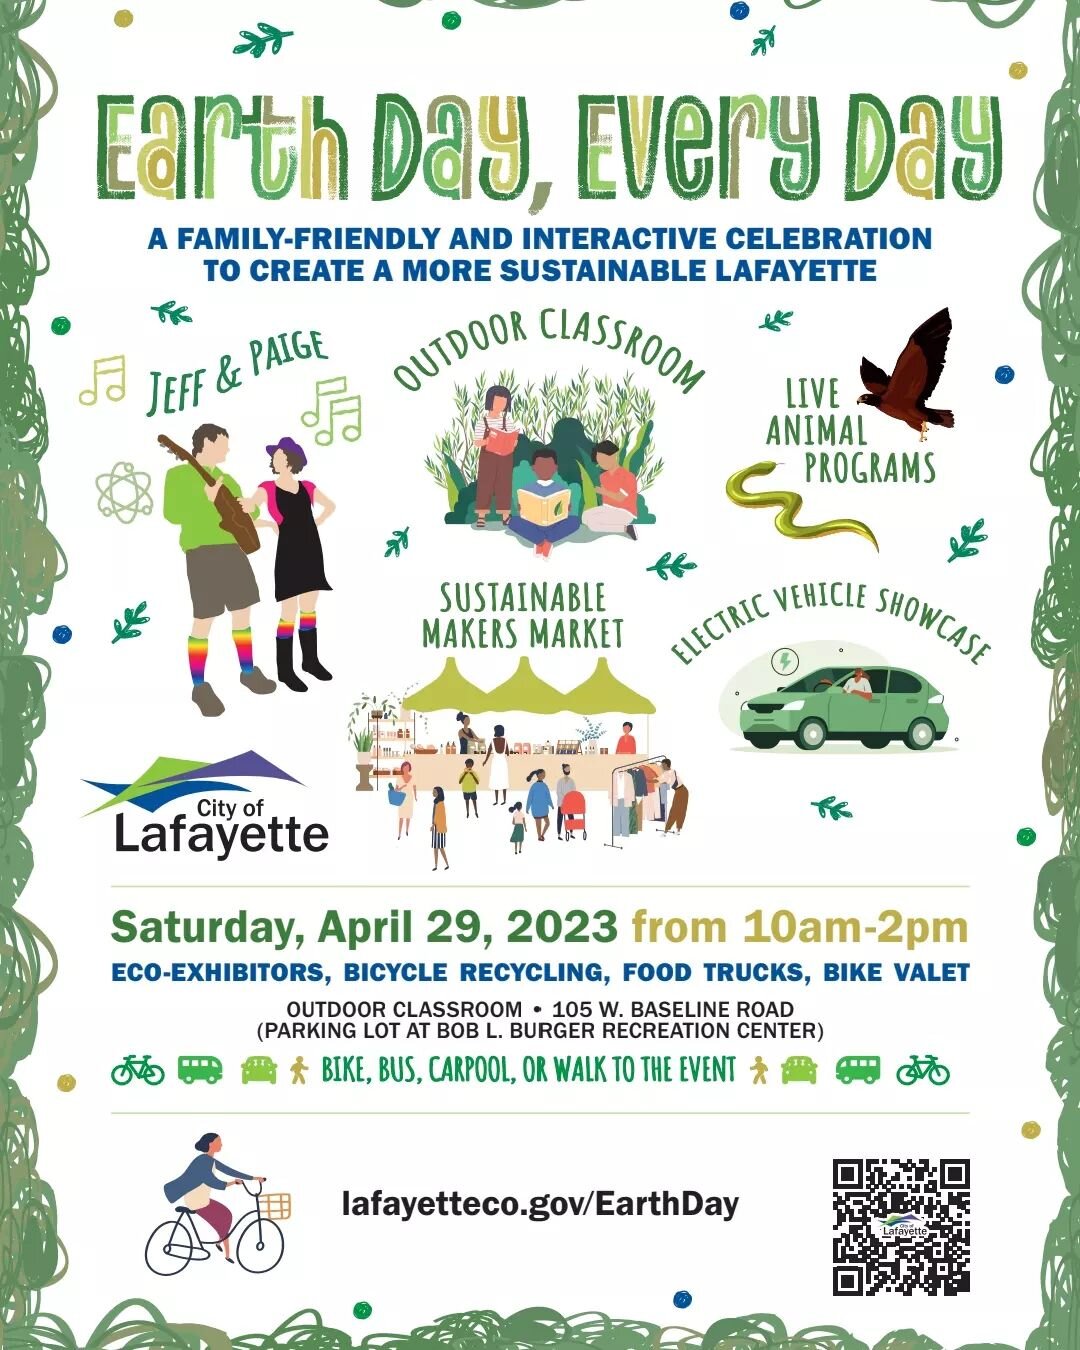 Excited to be bringing 100% upcycled candles to the Maker's Market.
April 29 10am-2pm

#spreadthelightcandles #earthday #earthdayeveryday #Lafayette #recycled #upcycled